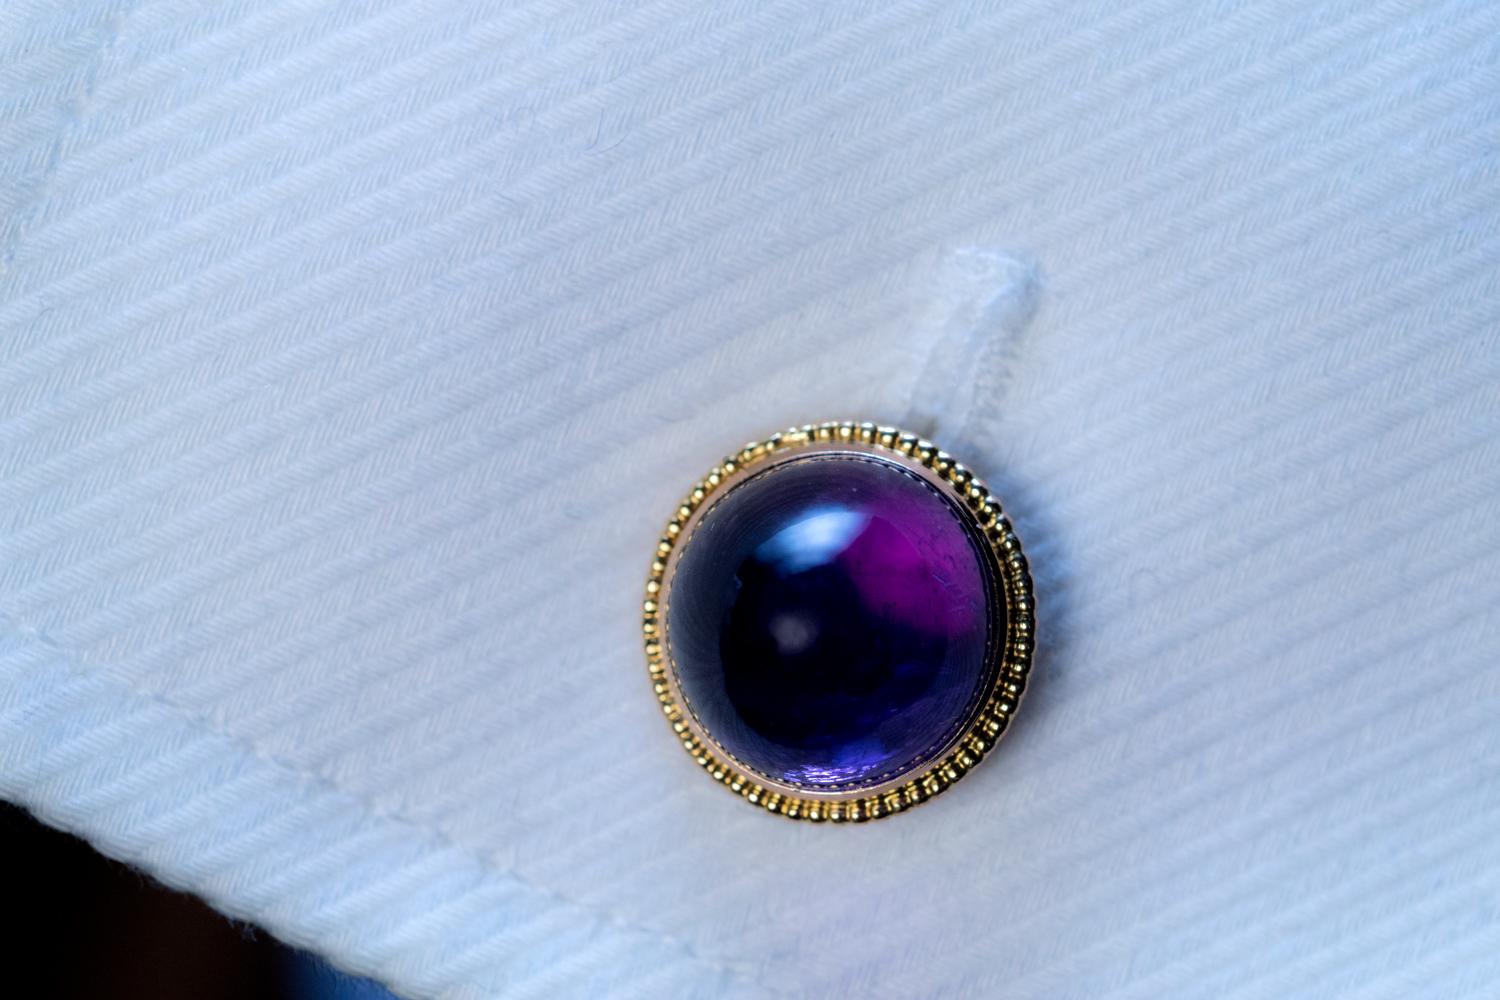 These 14K gold mounted cabochon cut amethyst cufflinks were made in Vienna, Austro-Hungarian Empire, in the 1890s-early 1900s.

The amethysts are likely of Siberian origin.

The cufflinks are marked with a fox head assay mark for the 4th gold